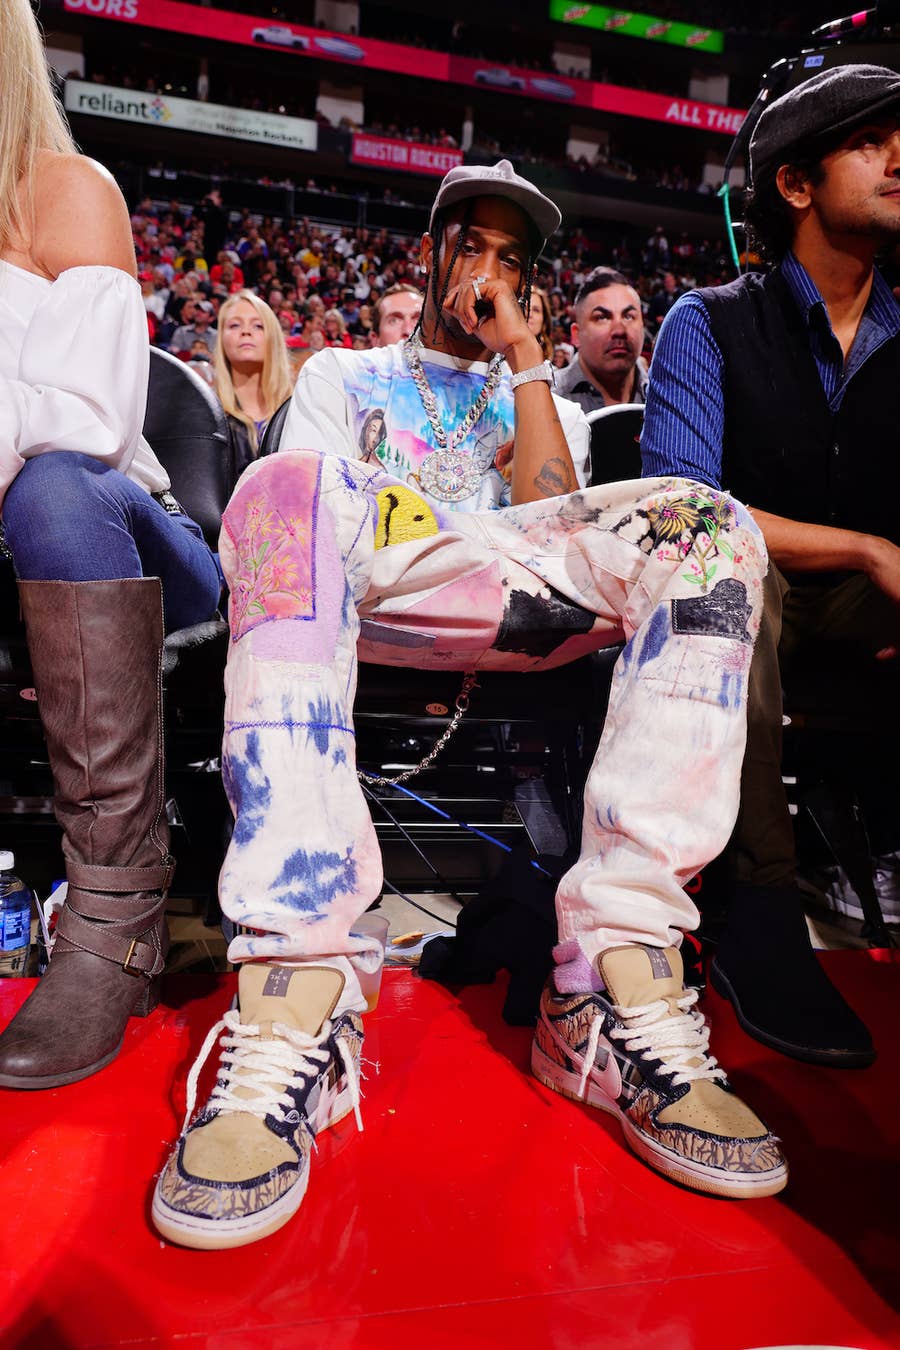 The Best Travis Scott Outfits of All Time